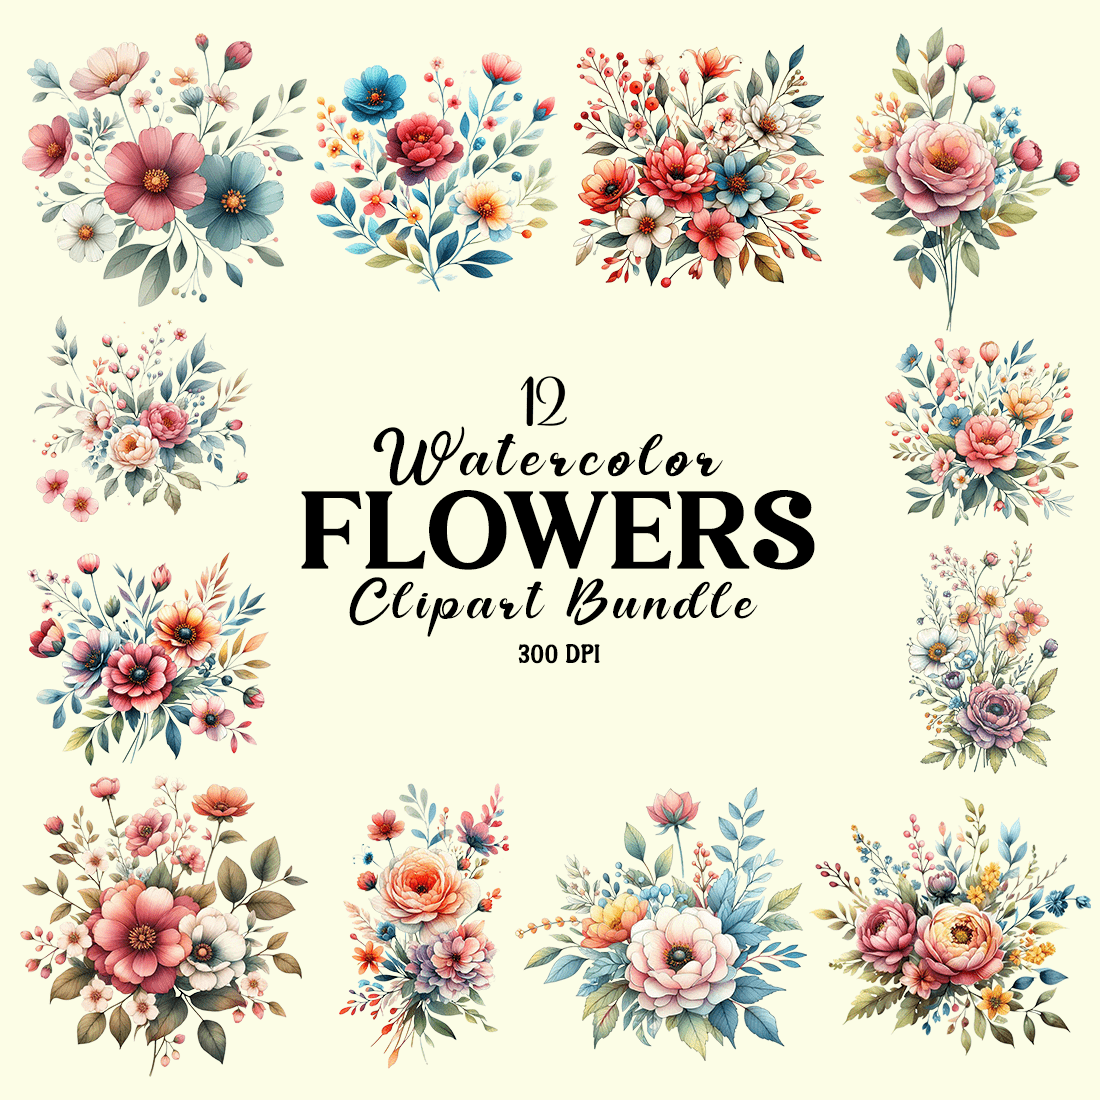 Watercolor Flowers Clipart cover image.